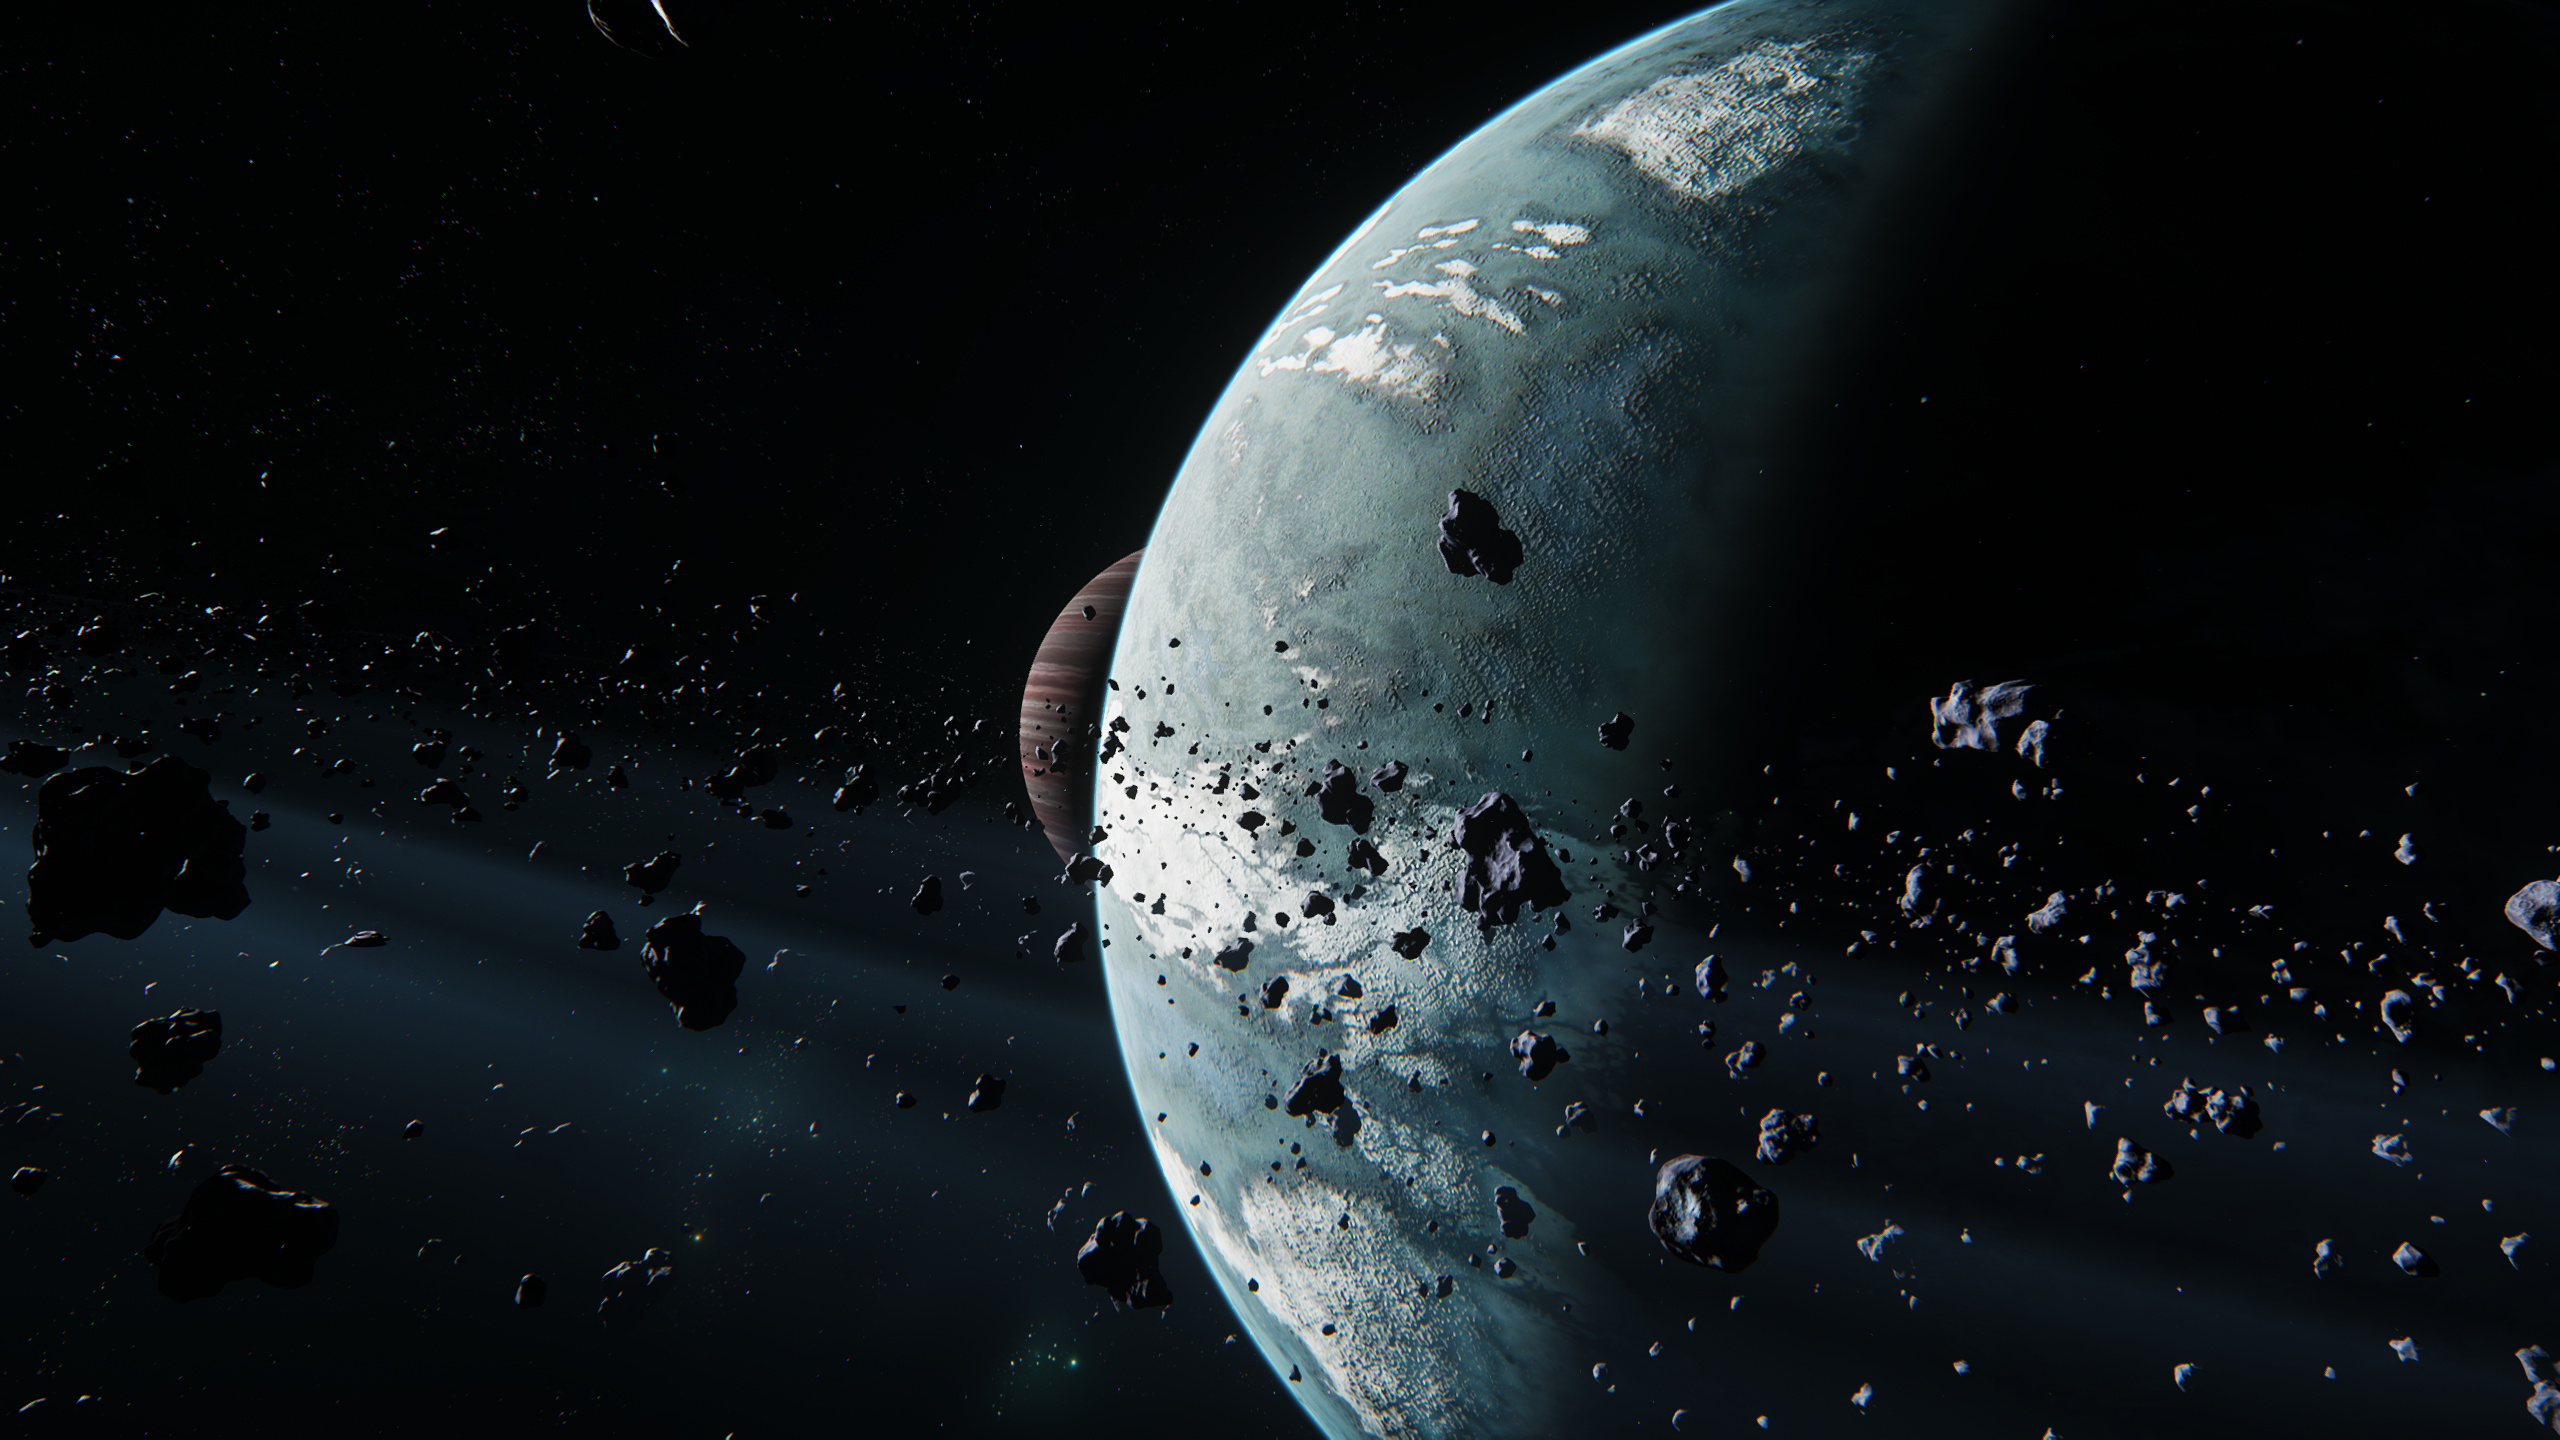 General 2560x1440 Star Citizen video games space